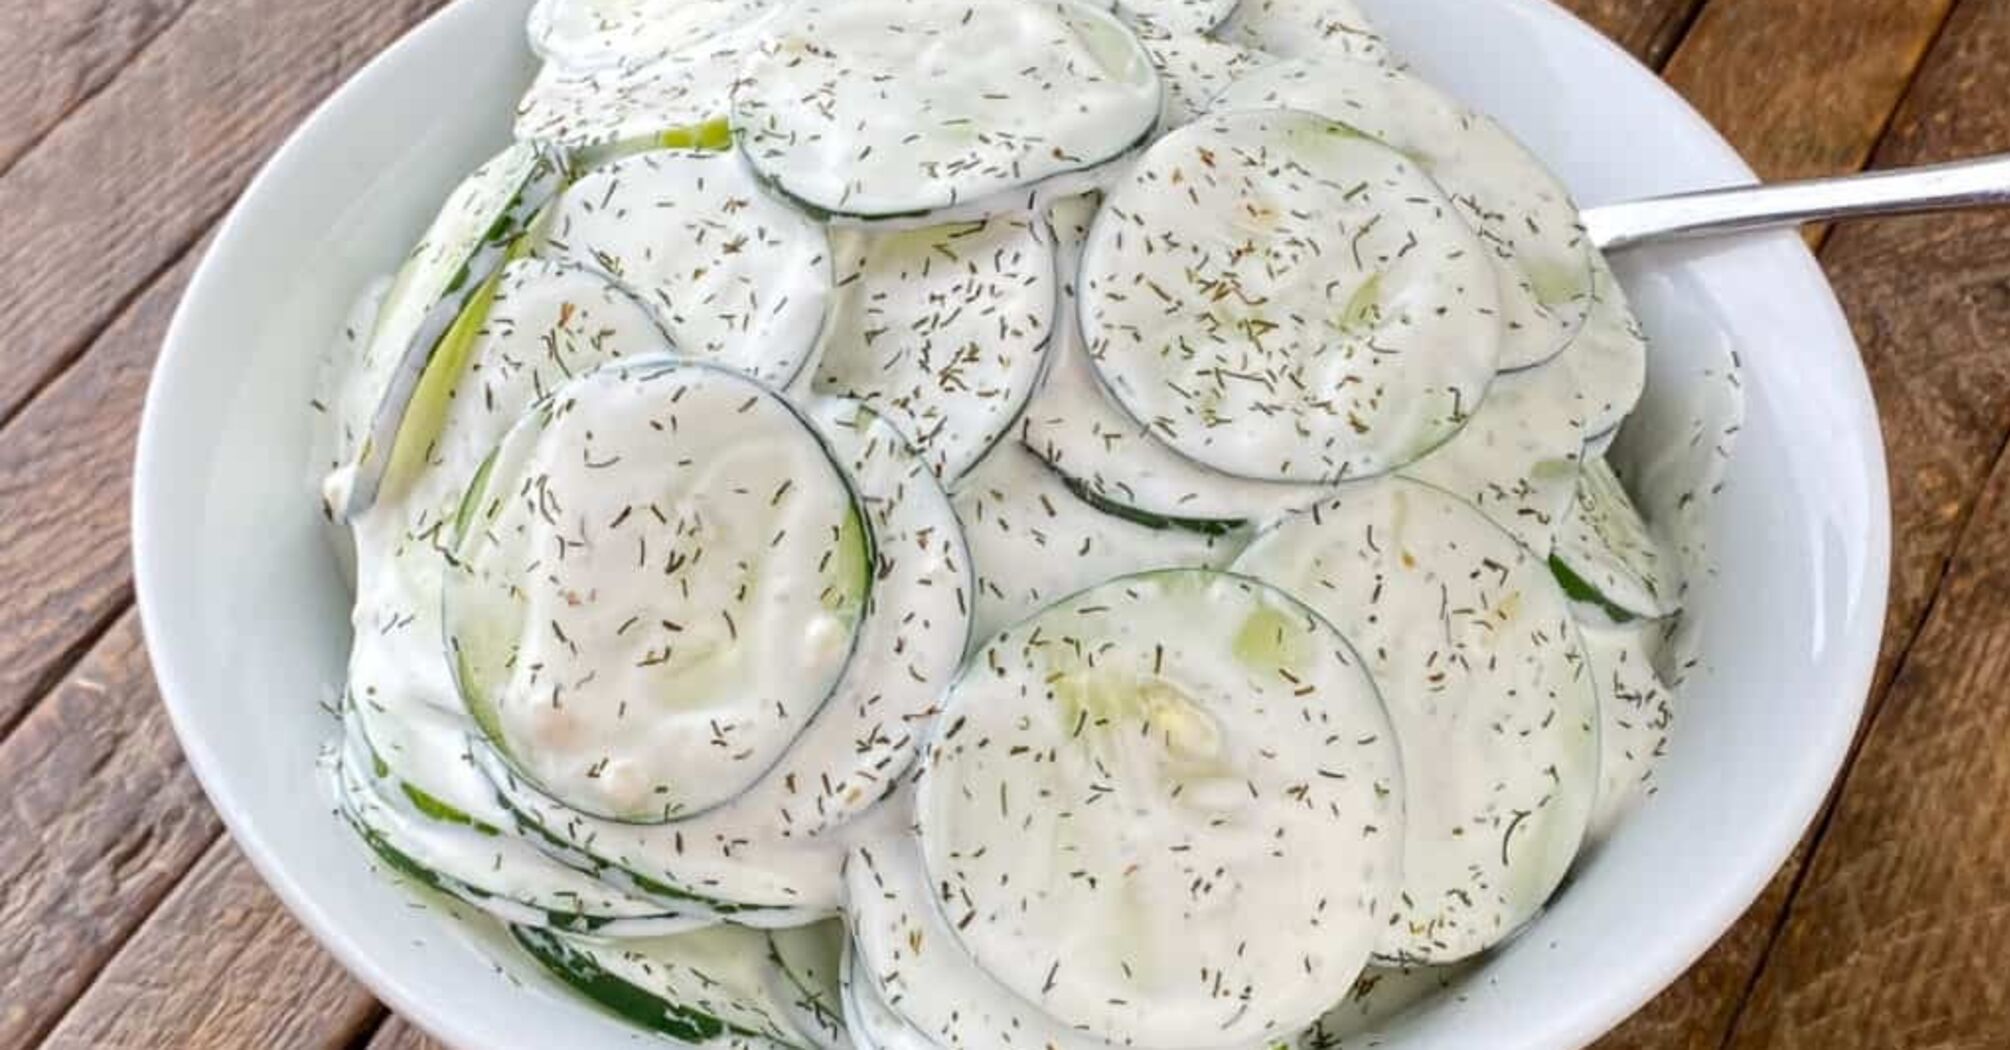 Cucumbers with herbs in sour cream: you haven't cooked vegetables like this before